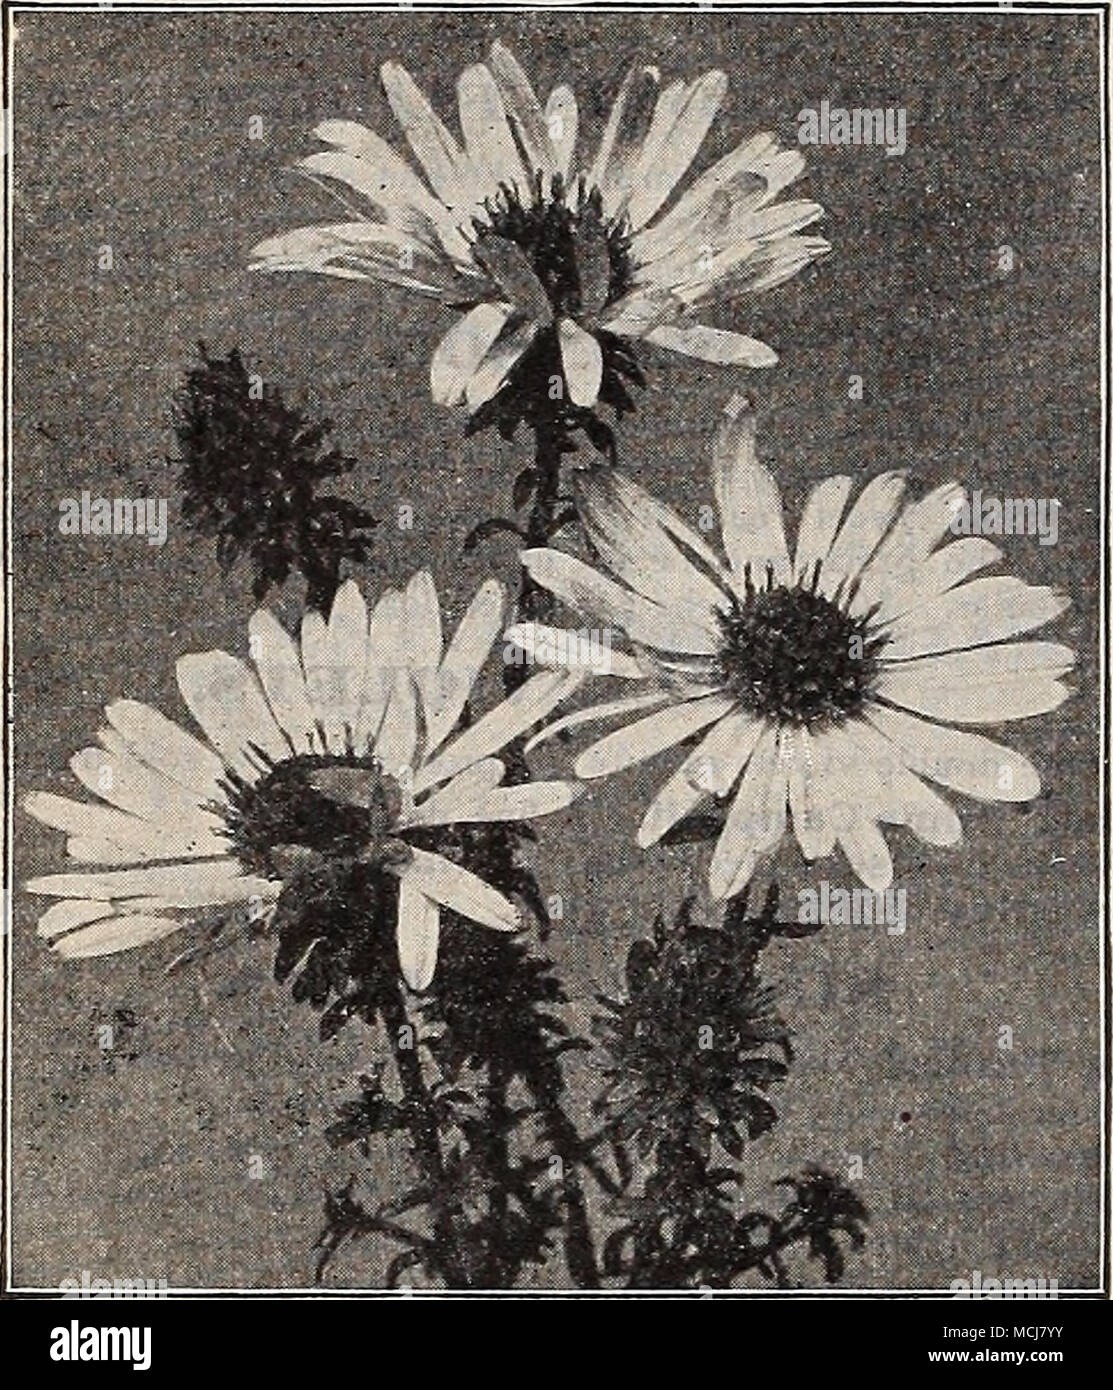 . Aster Grandiflorus. A.chillea [BlUfoil or Tarroio). &quot; The Pearl.&quot; Pure white, flowers allsummeir; 2 fl. niipendiila {Noble Tai&quot;'ow. Large corymbs; golden yel- low ; July ; 2 ft. Millefolium Rosenxa '.Rofsy W!/oil). Rosy pink; blooms all summer; 18 inches. Eupatorium {Fern-leaved Yarrow). Brilliant yellow; 4 ft. Tomentosa (Woolly Yarrow). Golden yellow; June. Adonis Pyrenaica. Orange-yellow; May. 25 cts. each; $2.50 per doz. Vernalis {Ox-Eye). One cf the earliest spring flowers; large yellow blossoms. 25 cts. each ; $2.50 per doz. Acoiiitum {Monkshood, or Helm/- i Flower). Aii Stock Photo